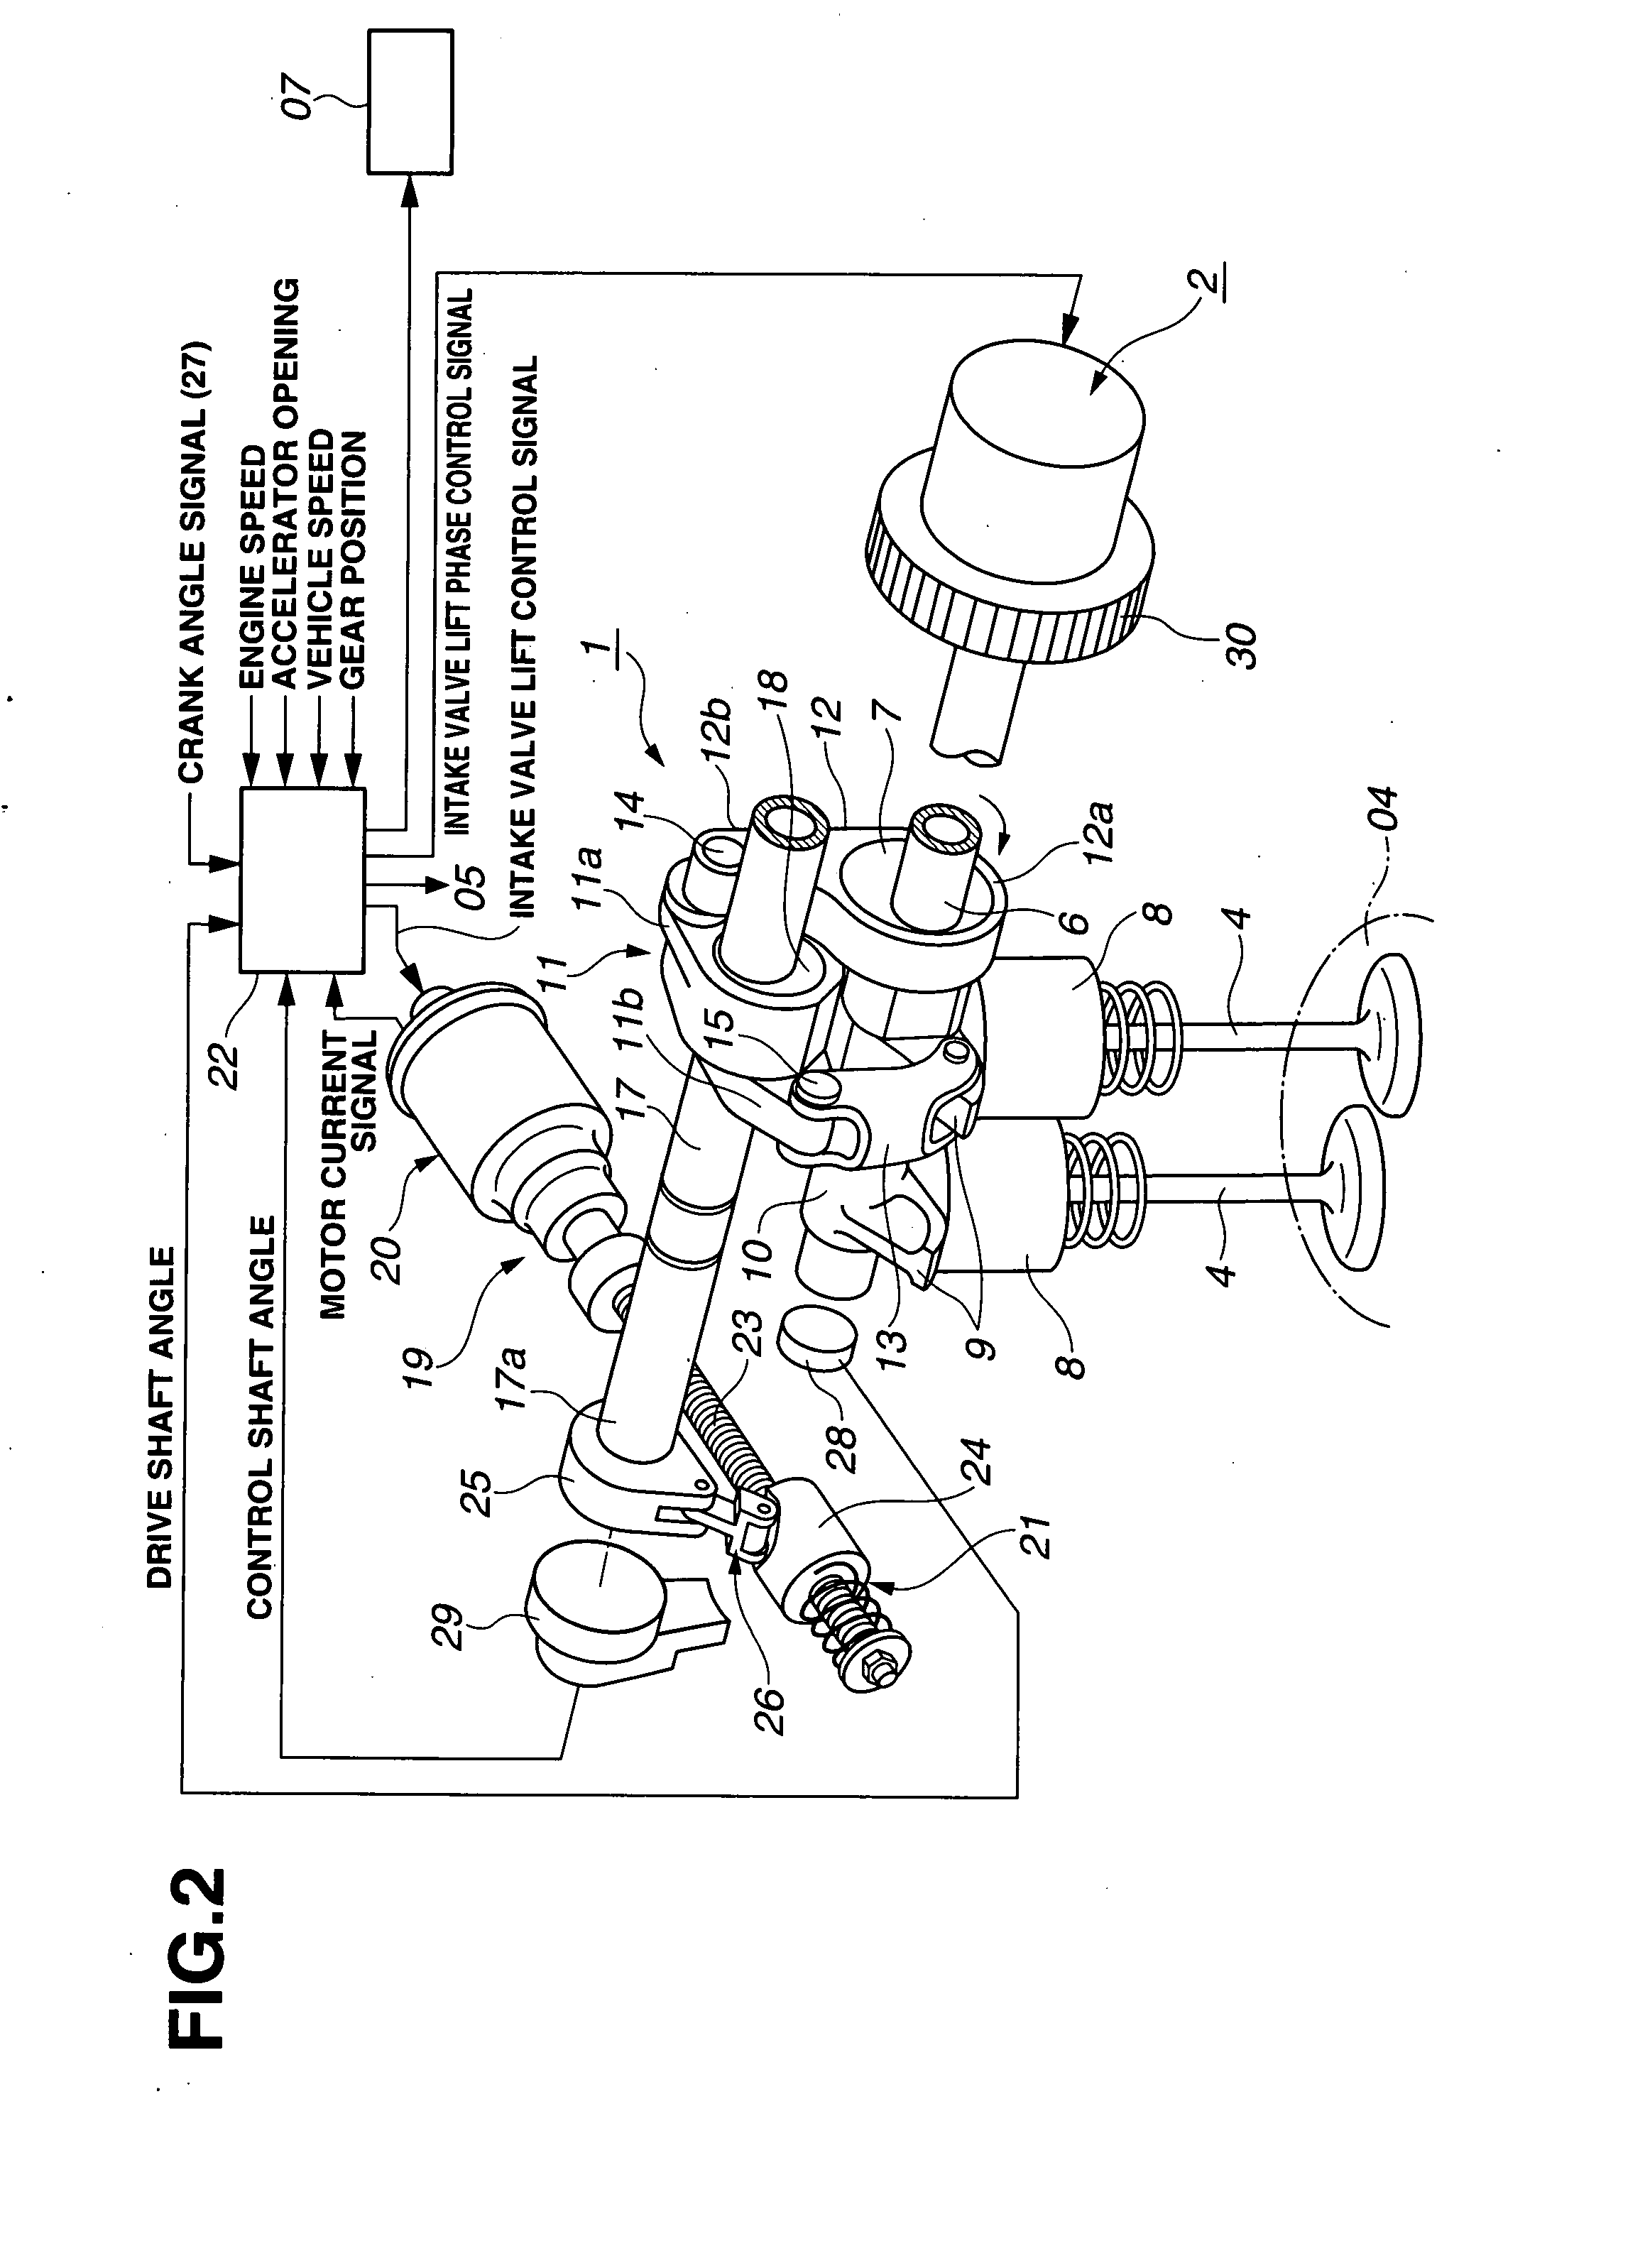 Variable valve actuating apparatus and process for internal combustion engine